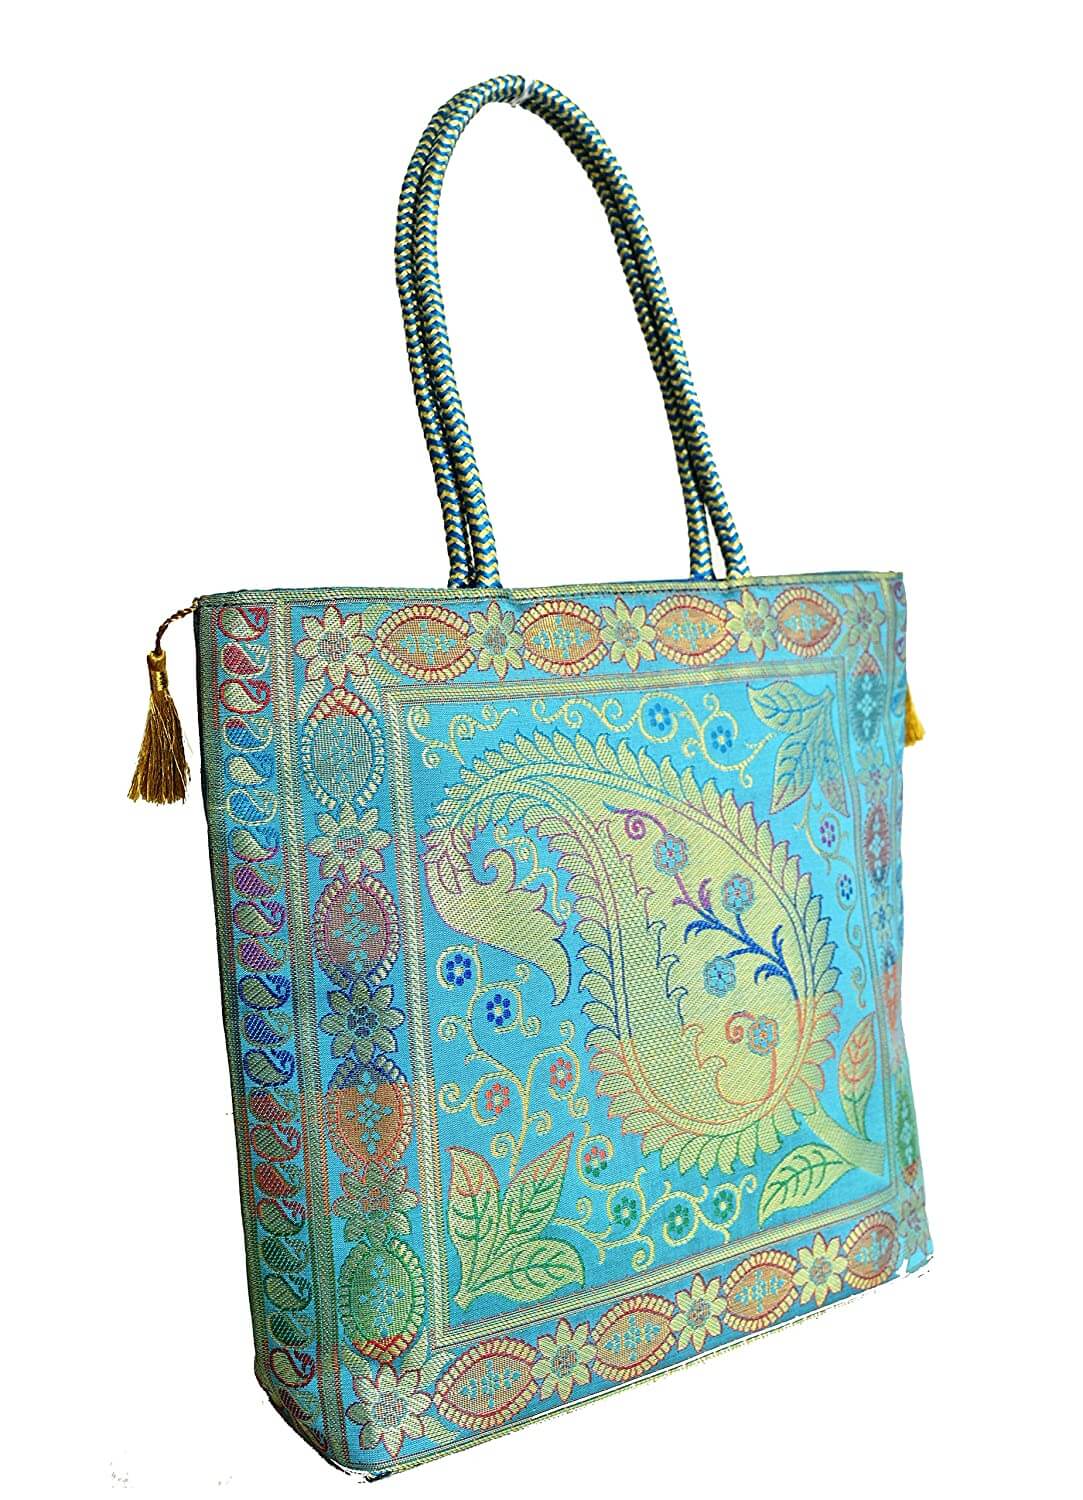 Embroidery Silk Handicraft Hand Bag, Shoulder, Tote Bag For Ladies (13 x 11.5 x 7.5 Inches, Leaves & Flower, Sky Blue Color) Mangal Fashions | Indian Home Decor and Craft